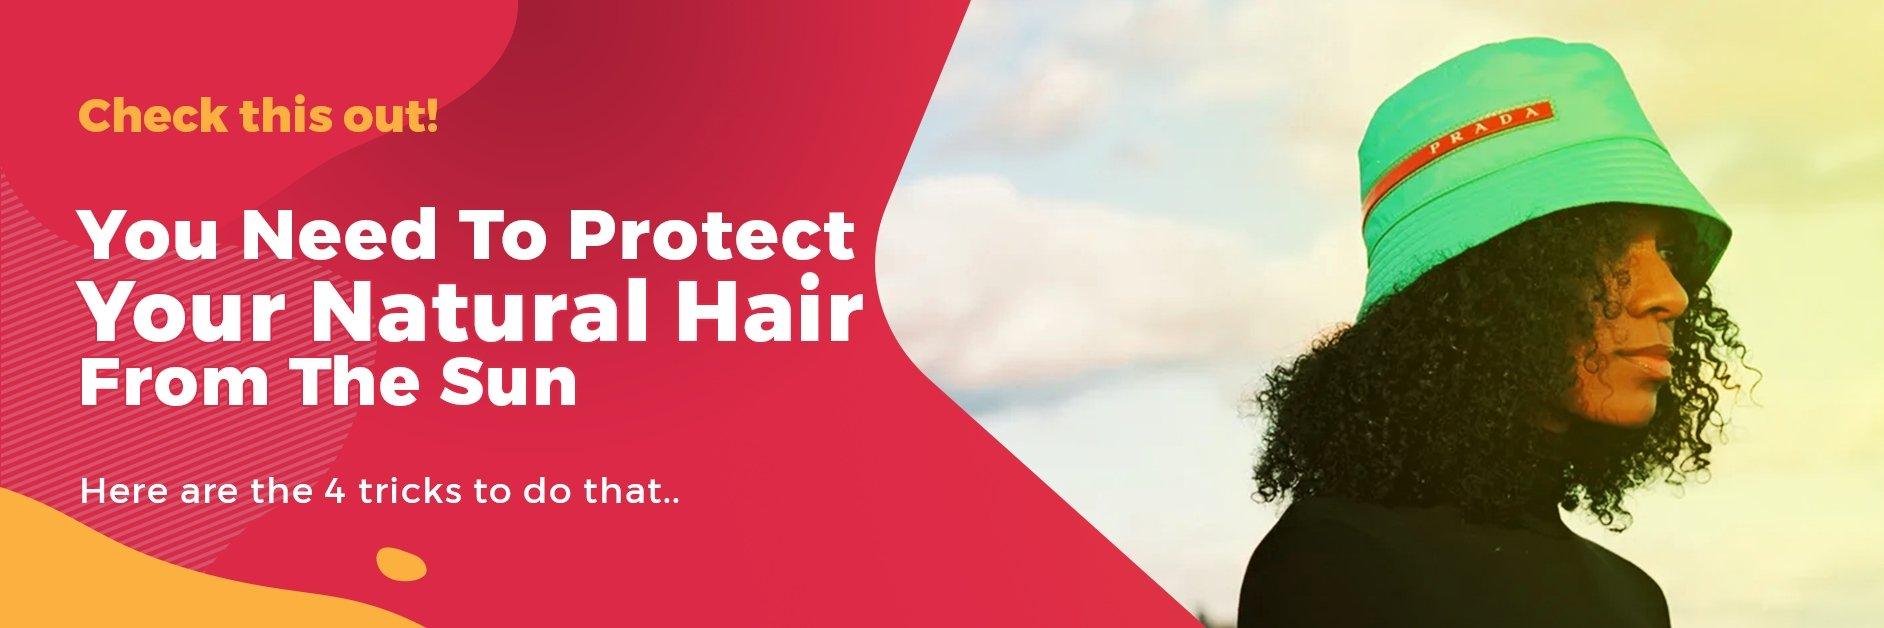 You Need to Protect your Natural Hair from the Sun! - GlammedNaturallyOil